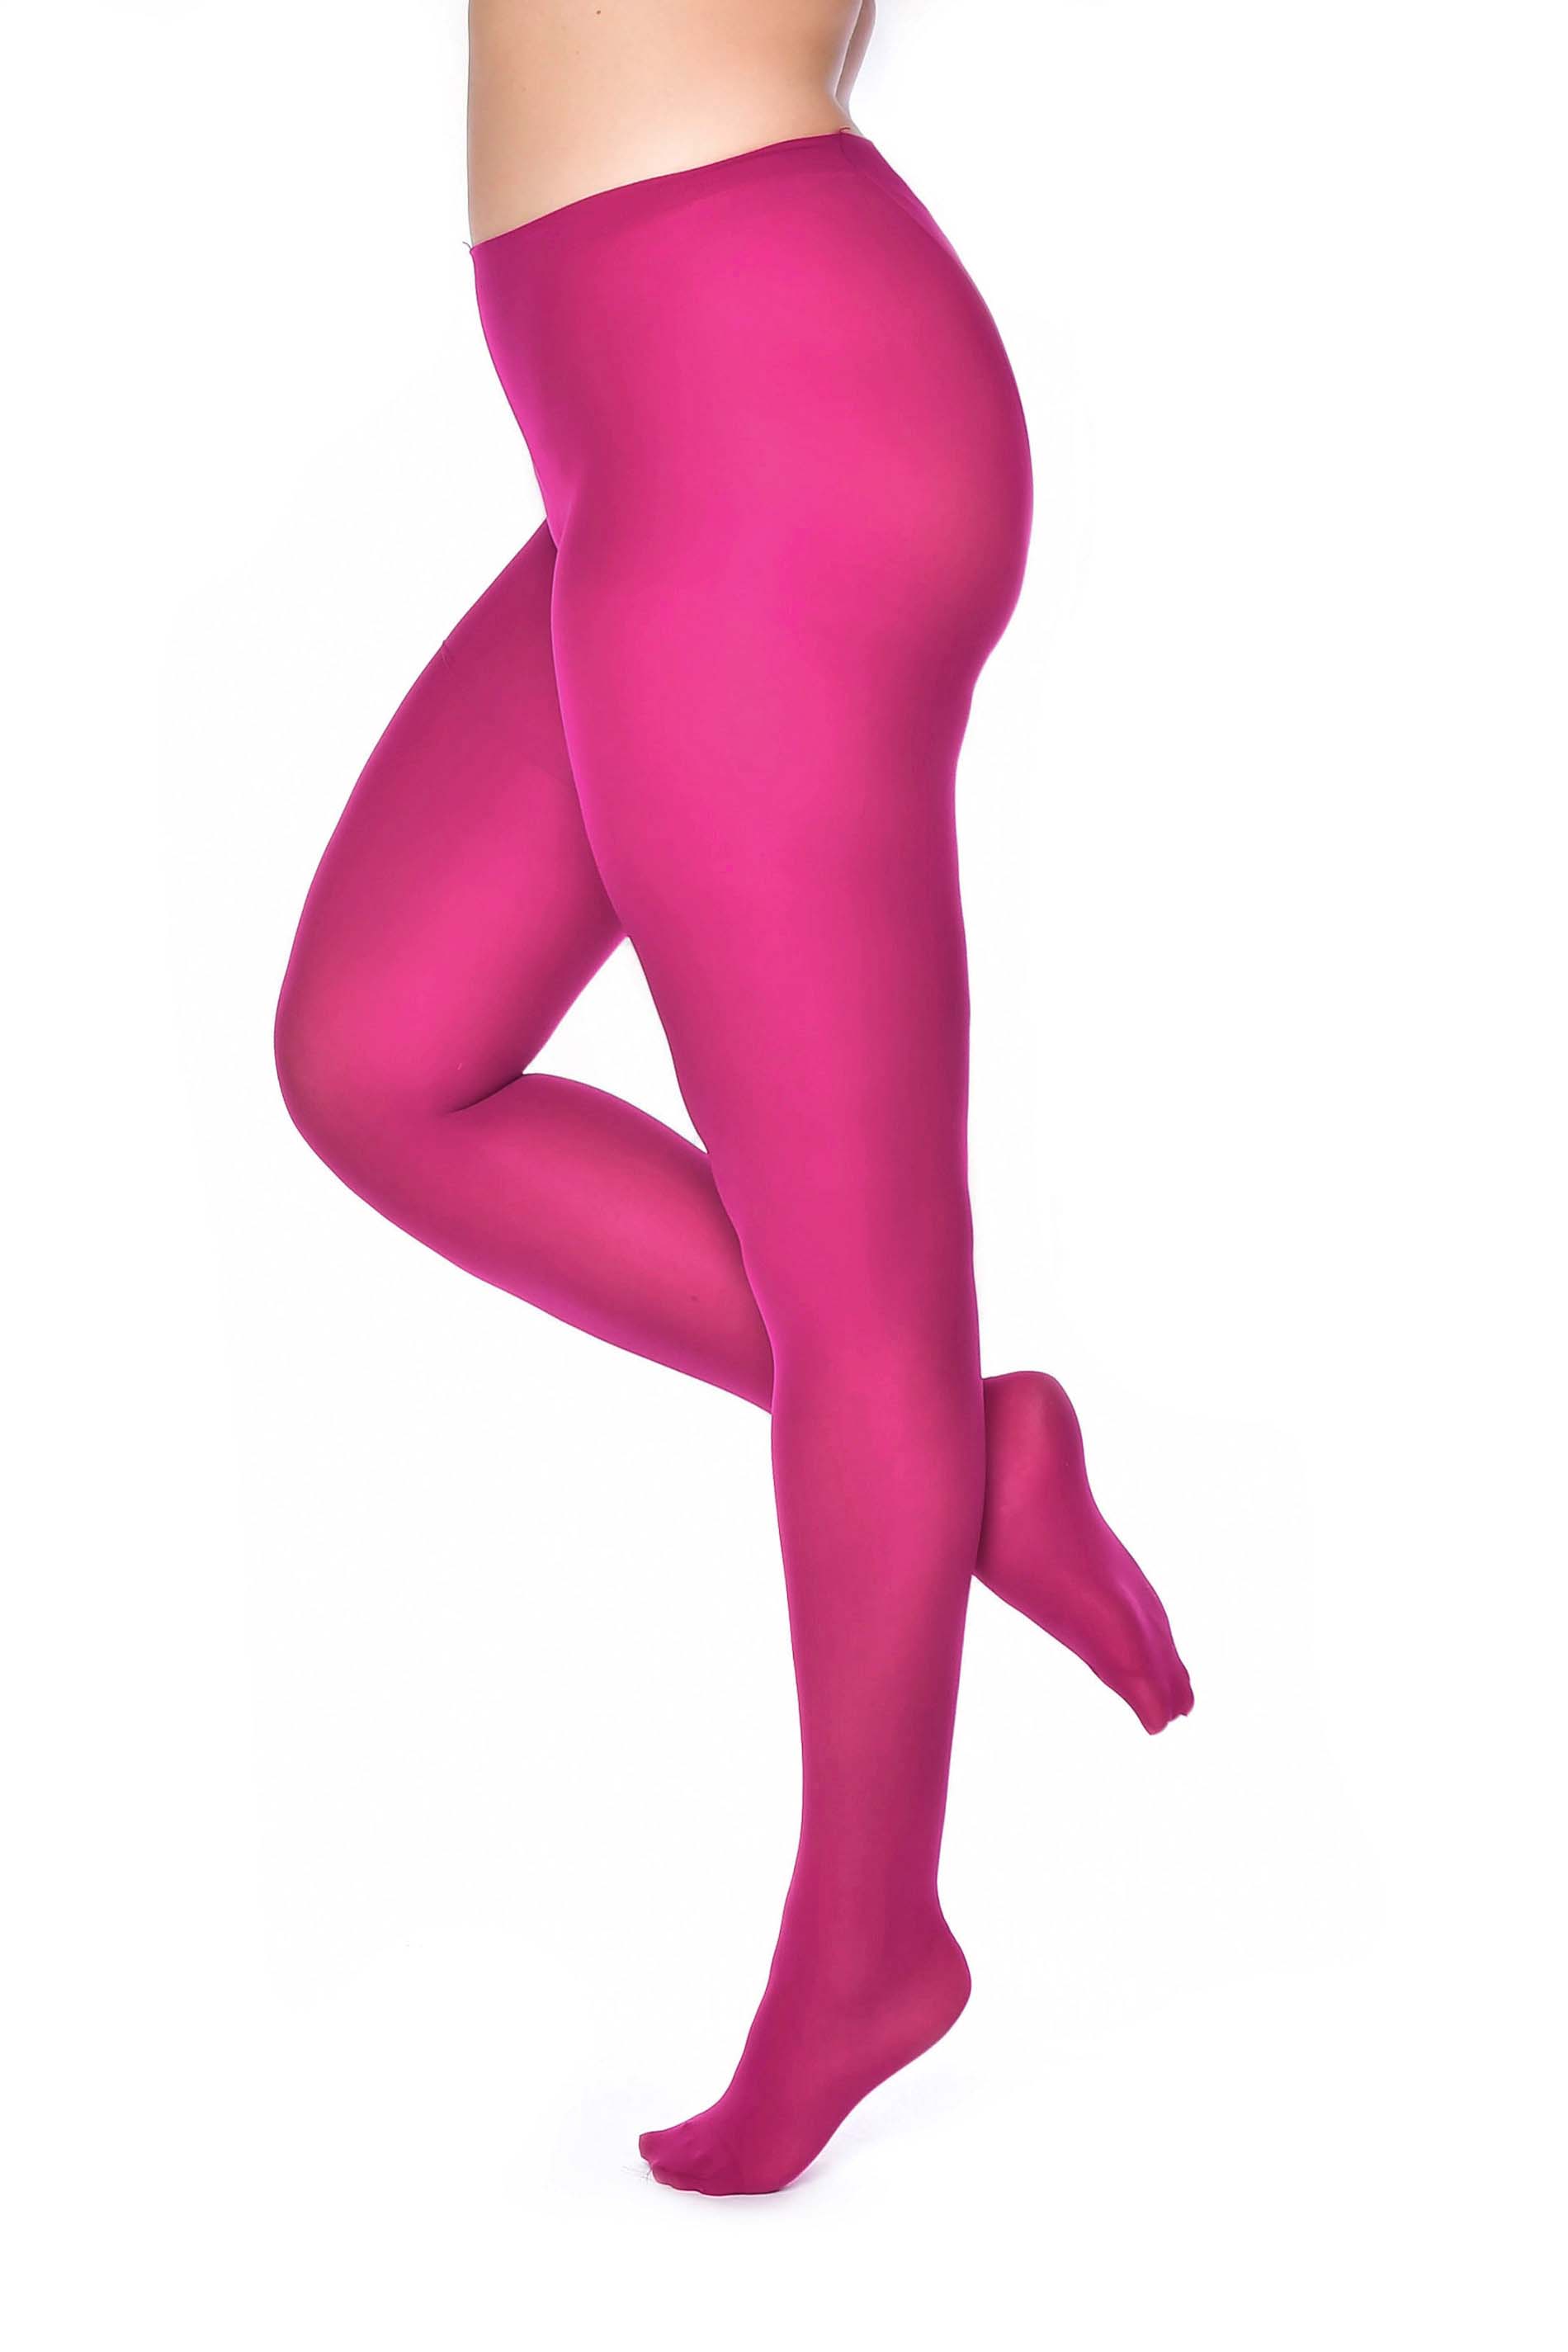 Adult Tights- Hot Pink